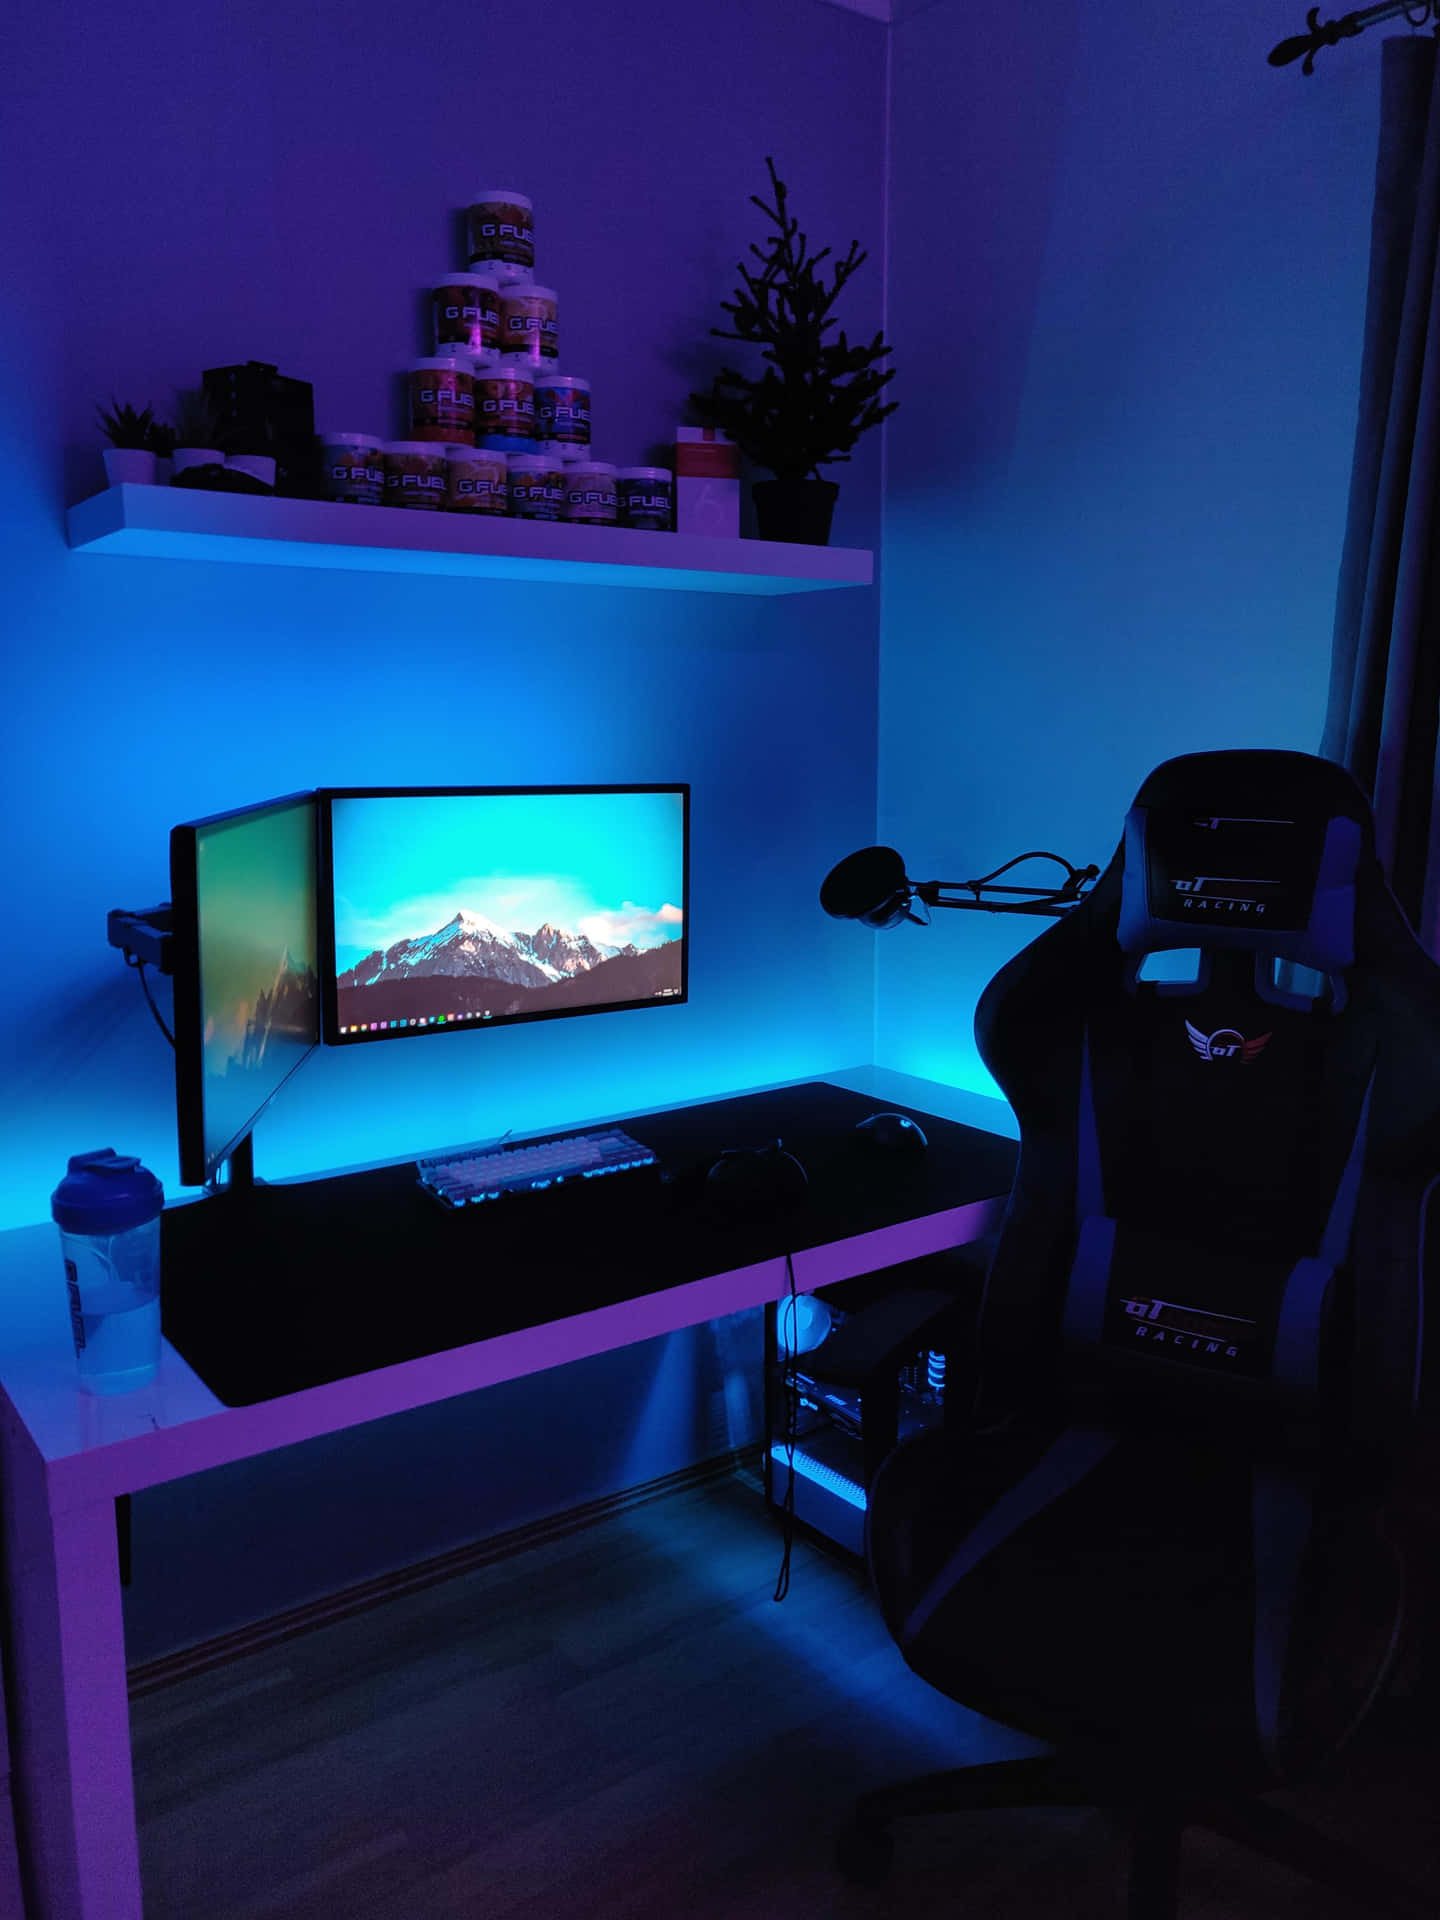 A sleek and powerful gaming PC setup ready for all your gaming needs. Wallpaper